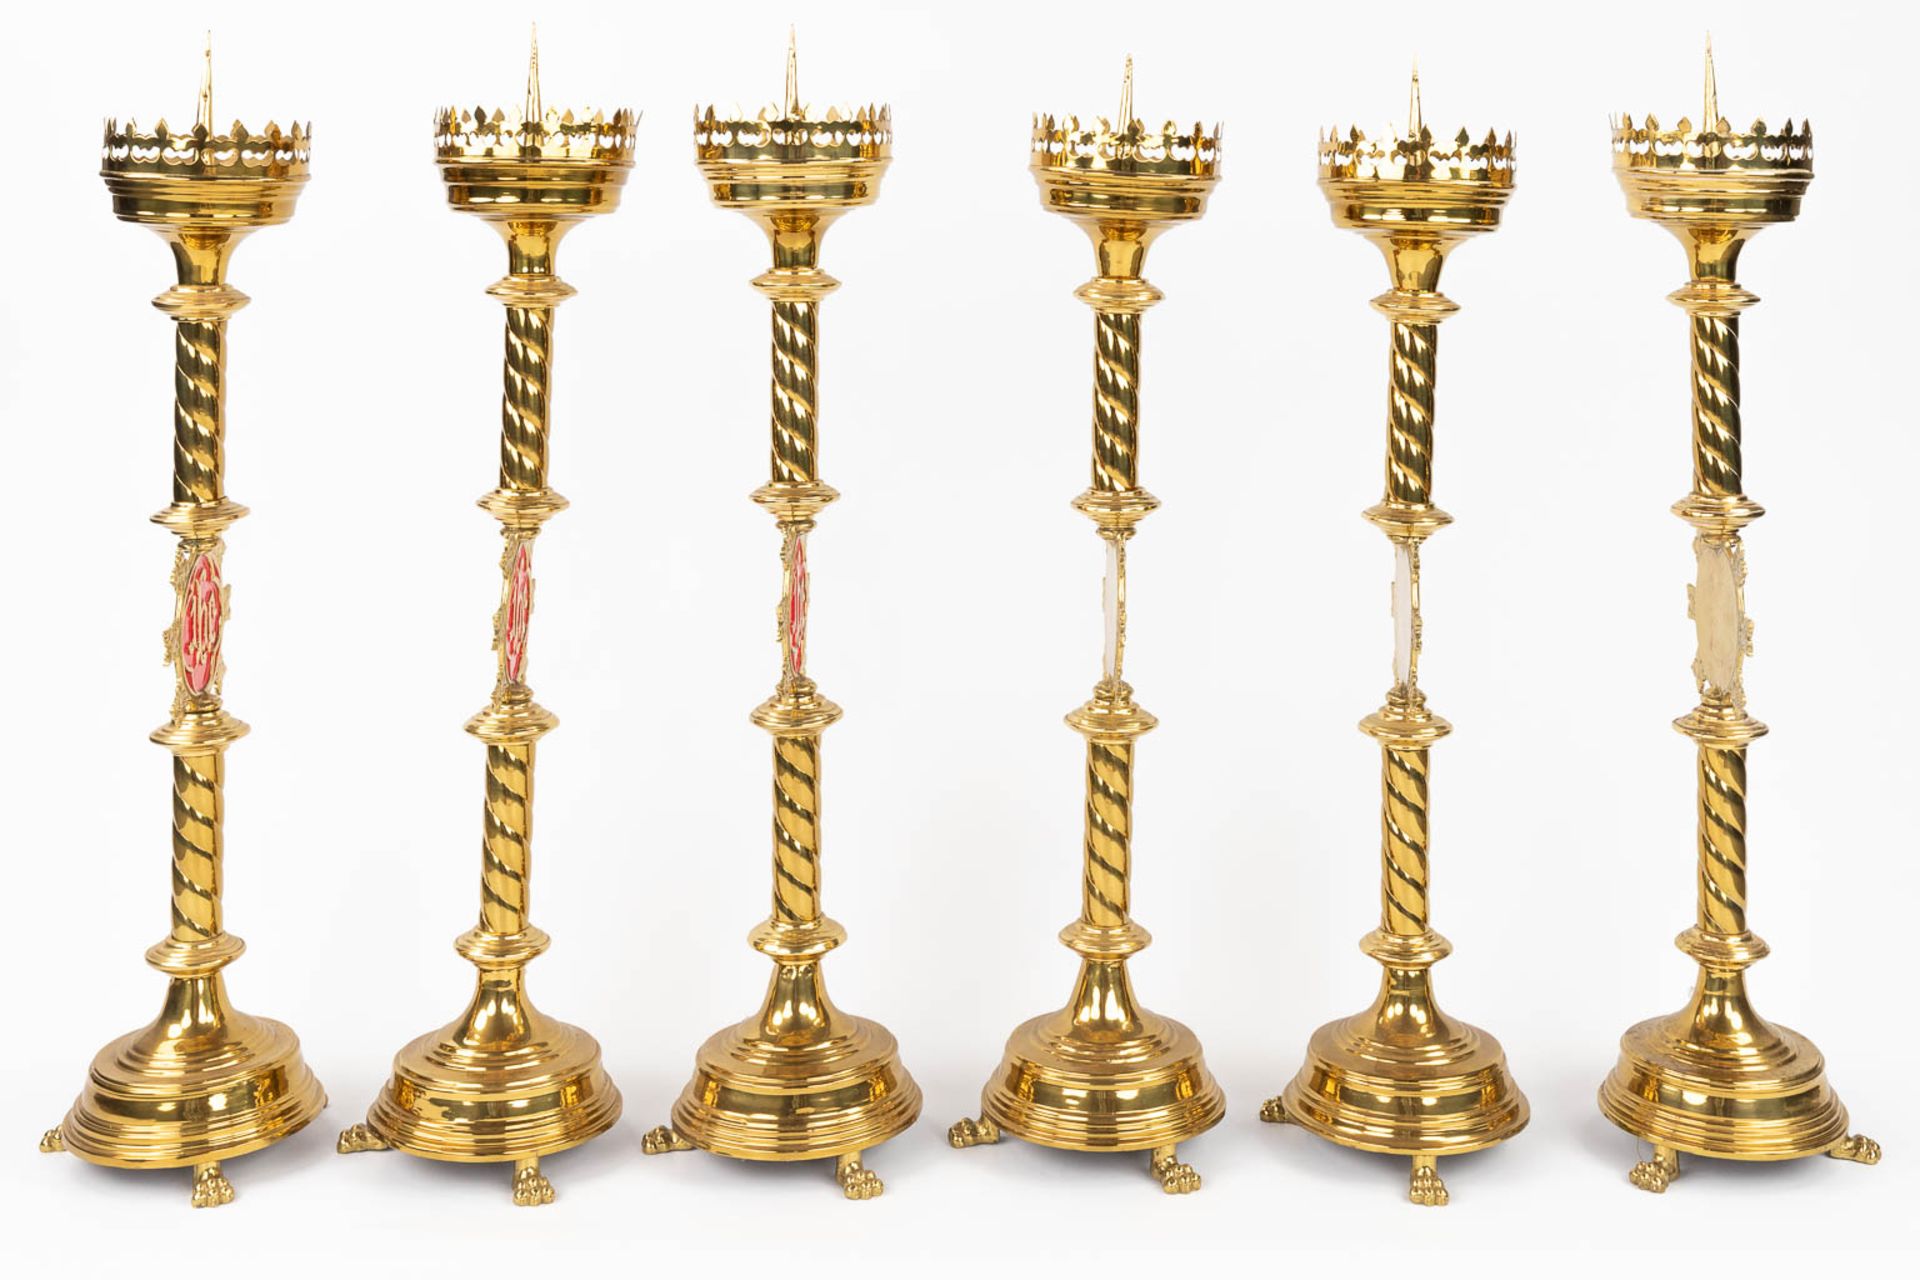 A set of 6 Church candlesticks with red IHS logo. (H:80 x D:20 cm) - Image 6 of 11